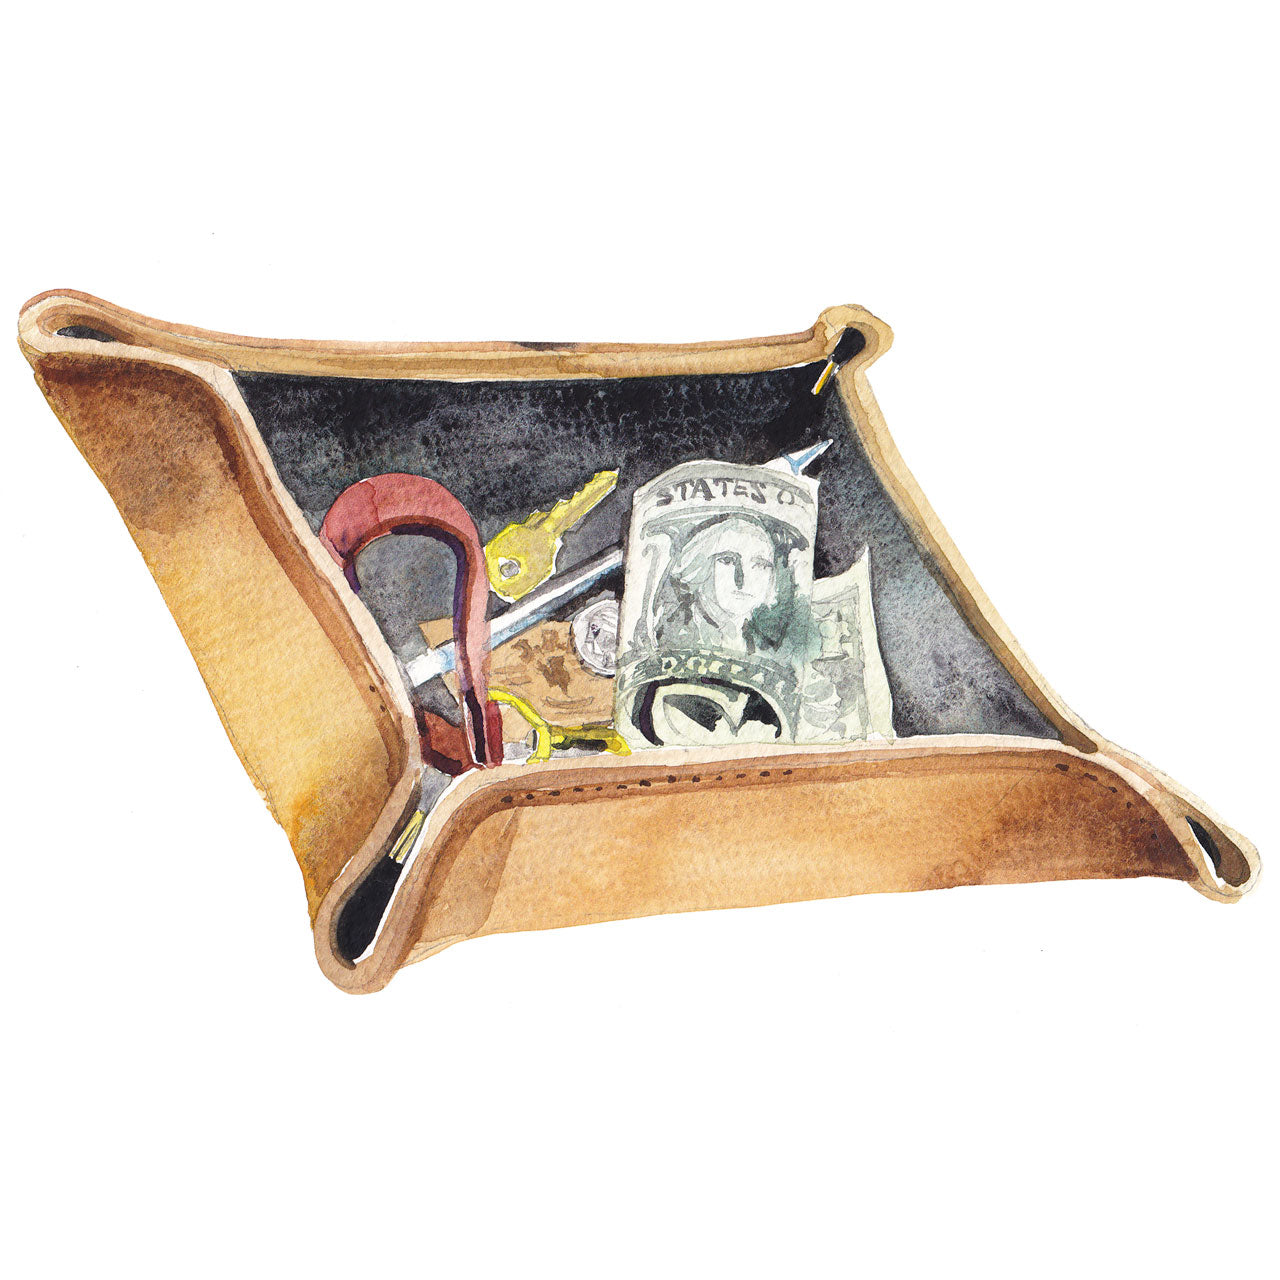 Travel-stuff Tray in tan grain leather with sand canvas inner – J